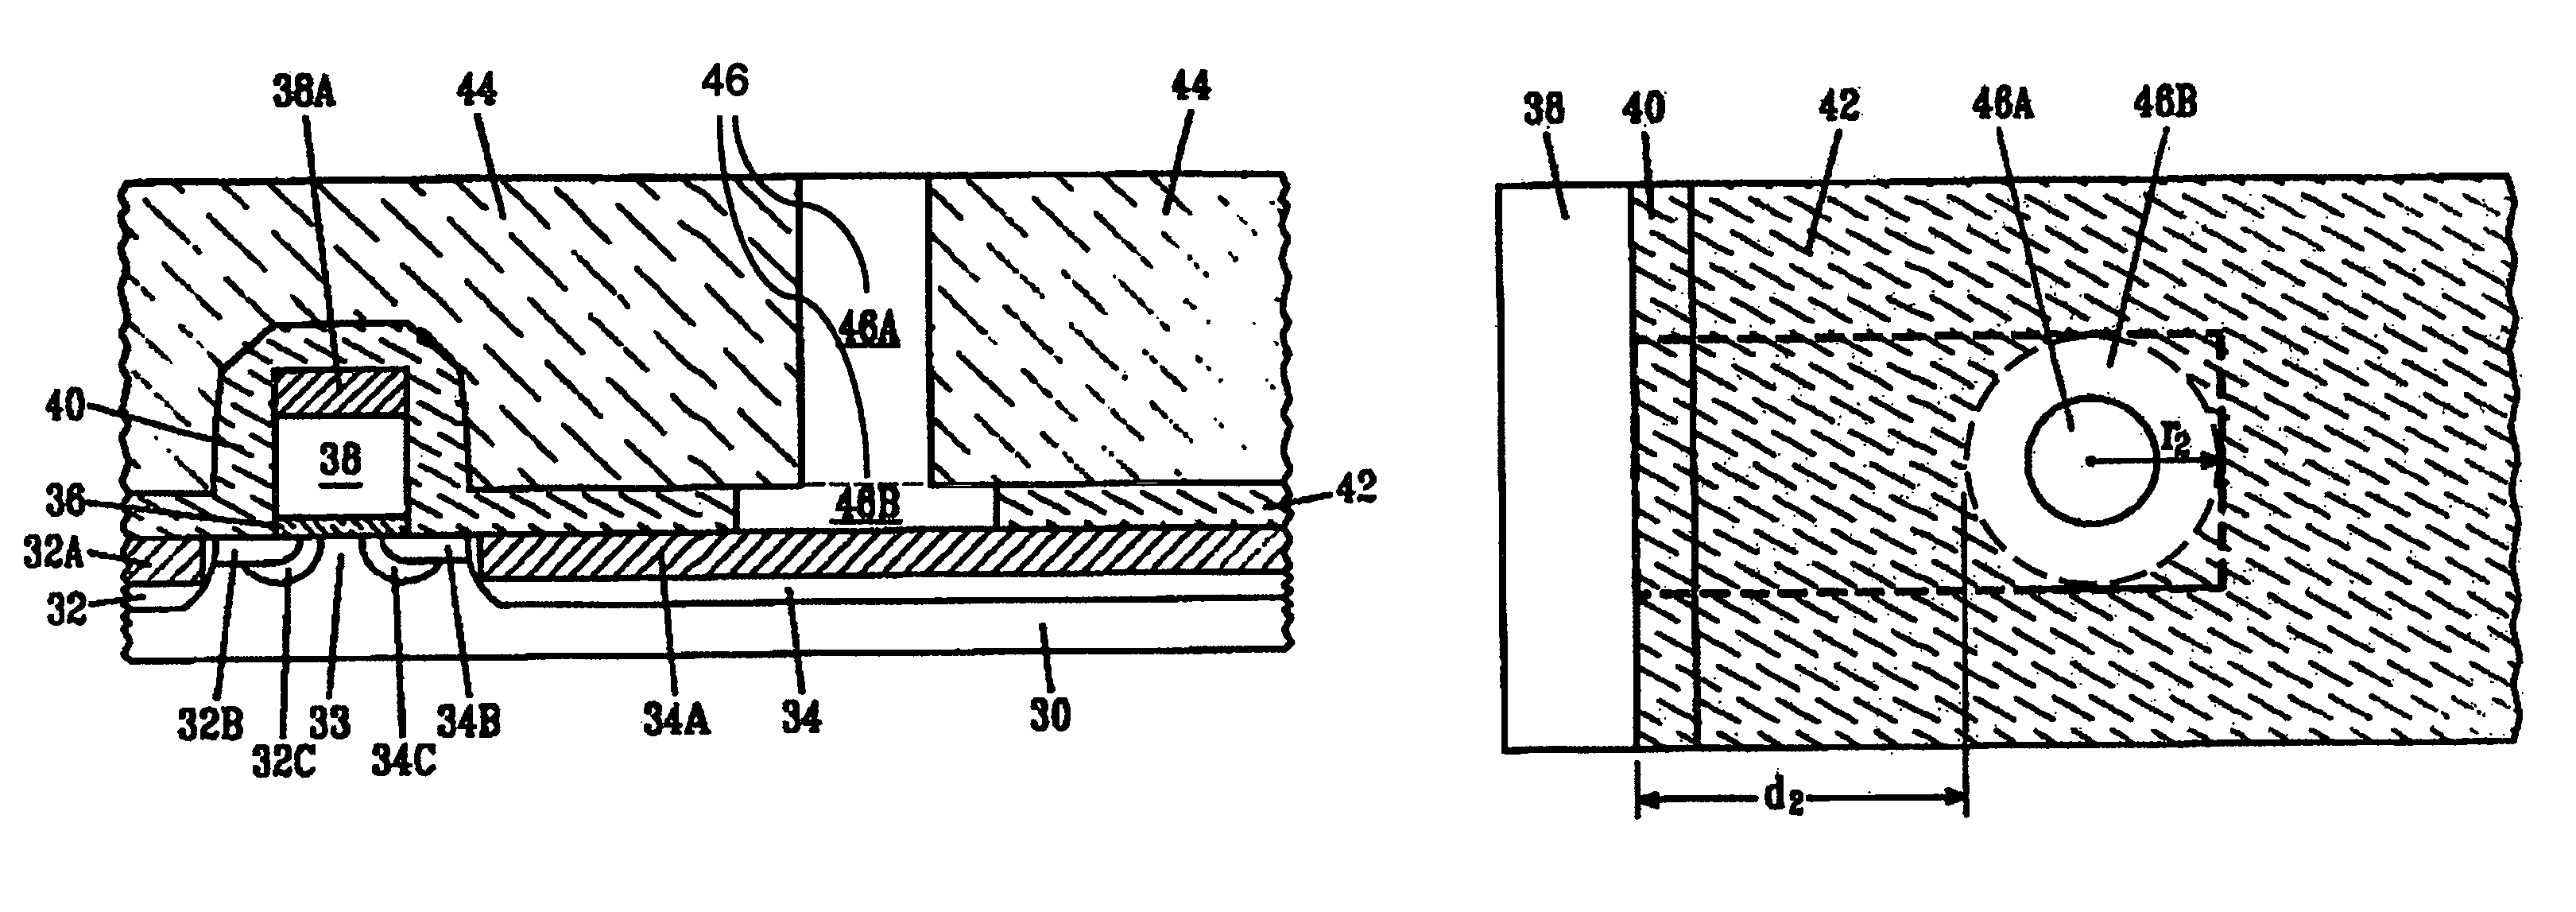 Field effect transistors (FETS) with inverted source/drain metallic contacts, and method of fabricating same